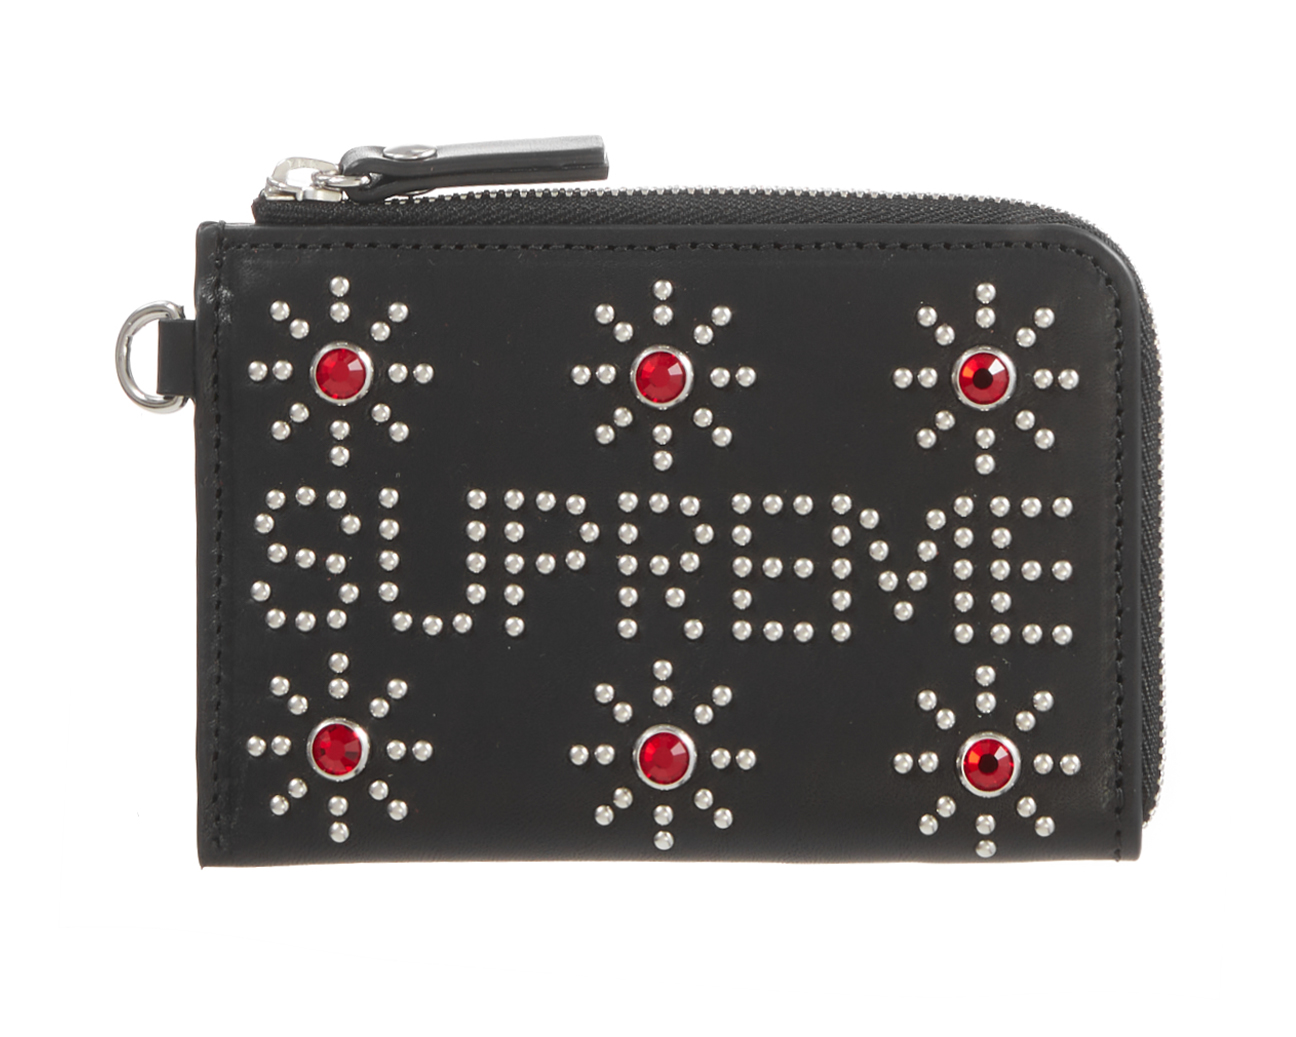 SUPREME HTC Studded Walletメンズ